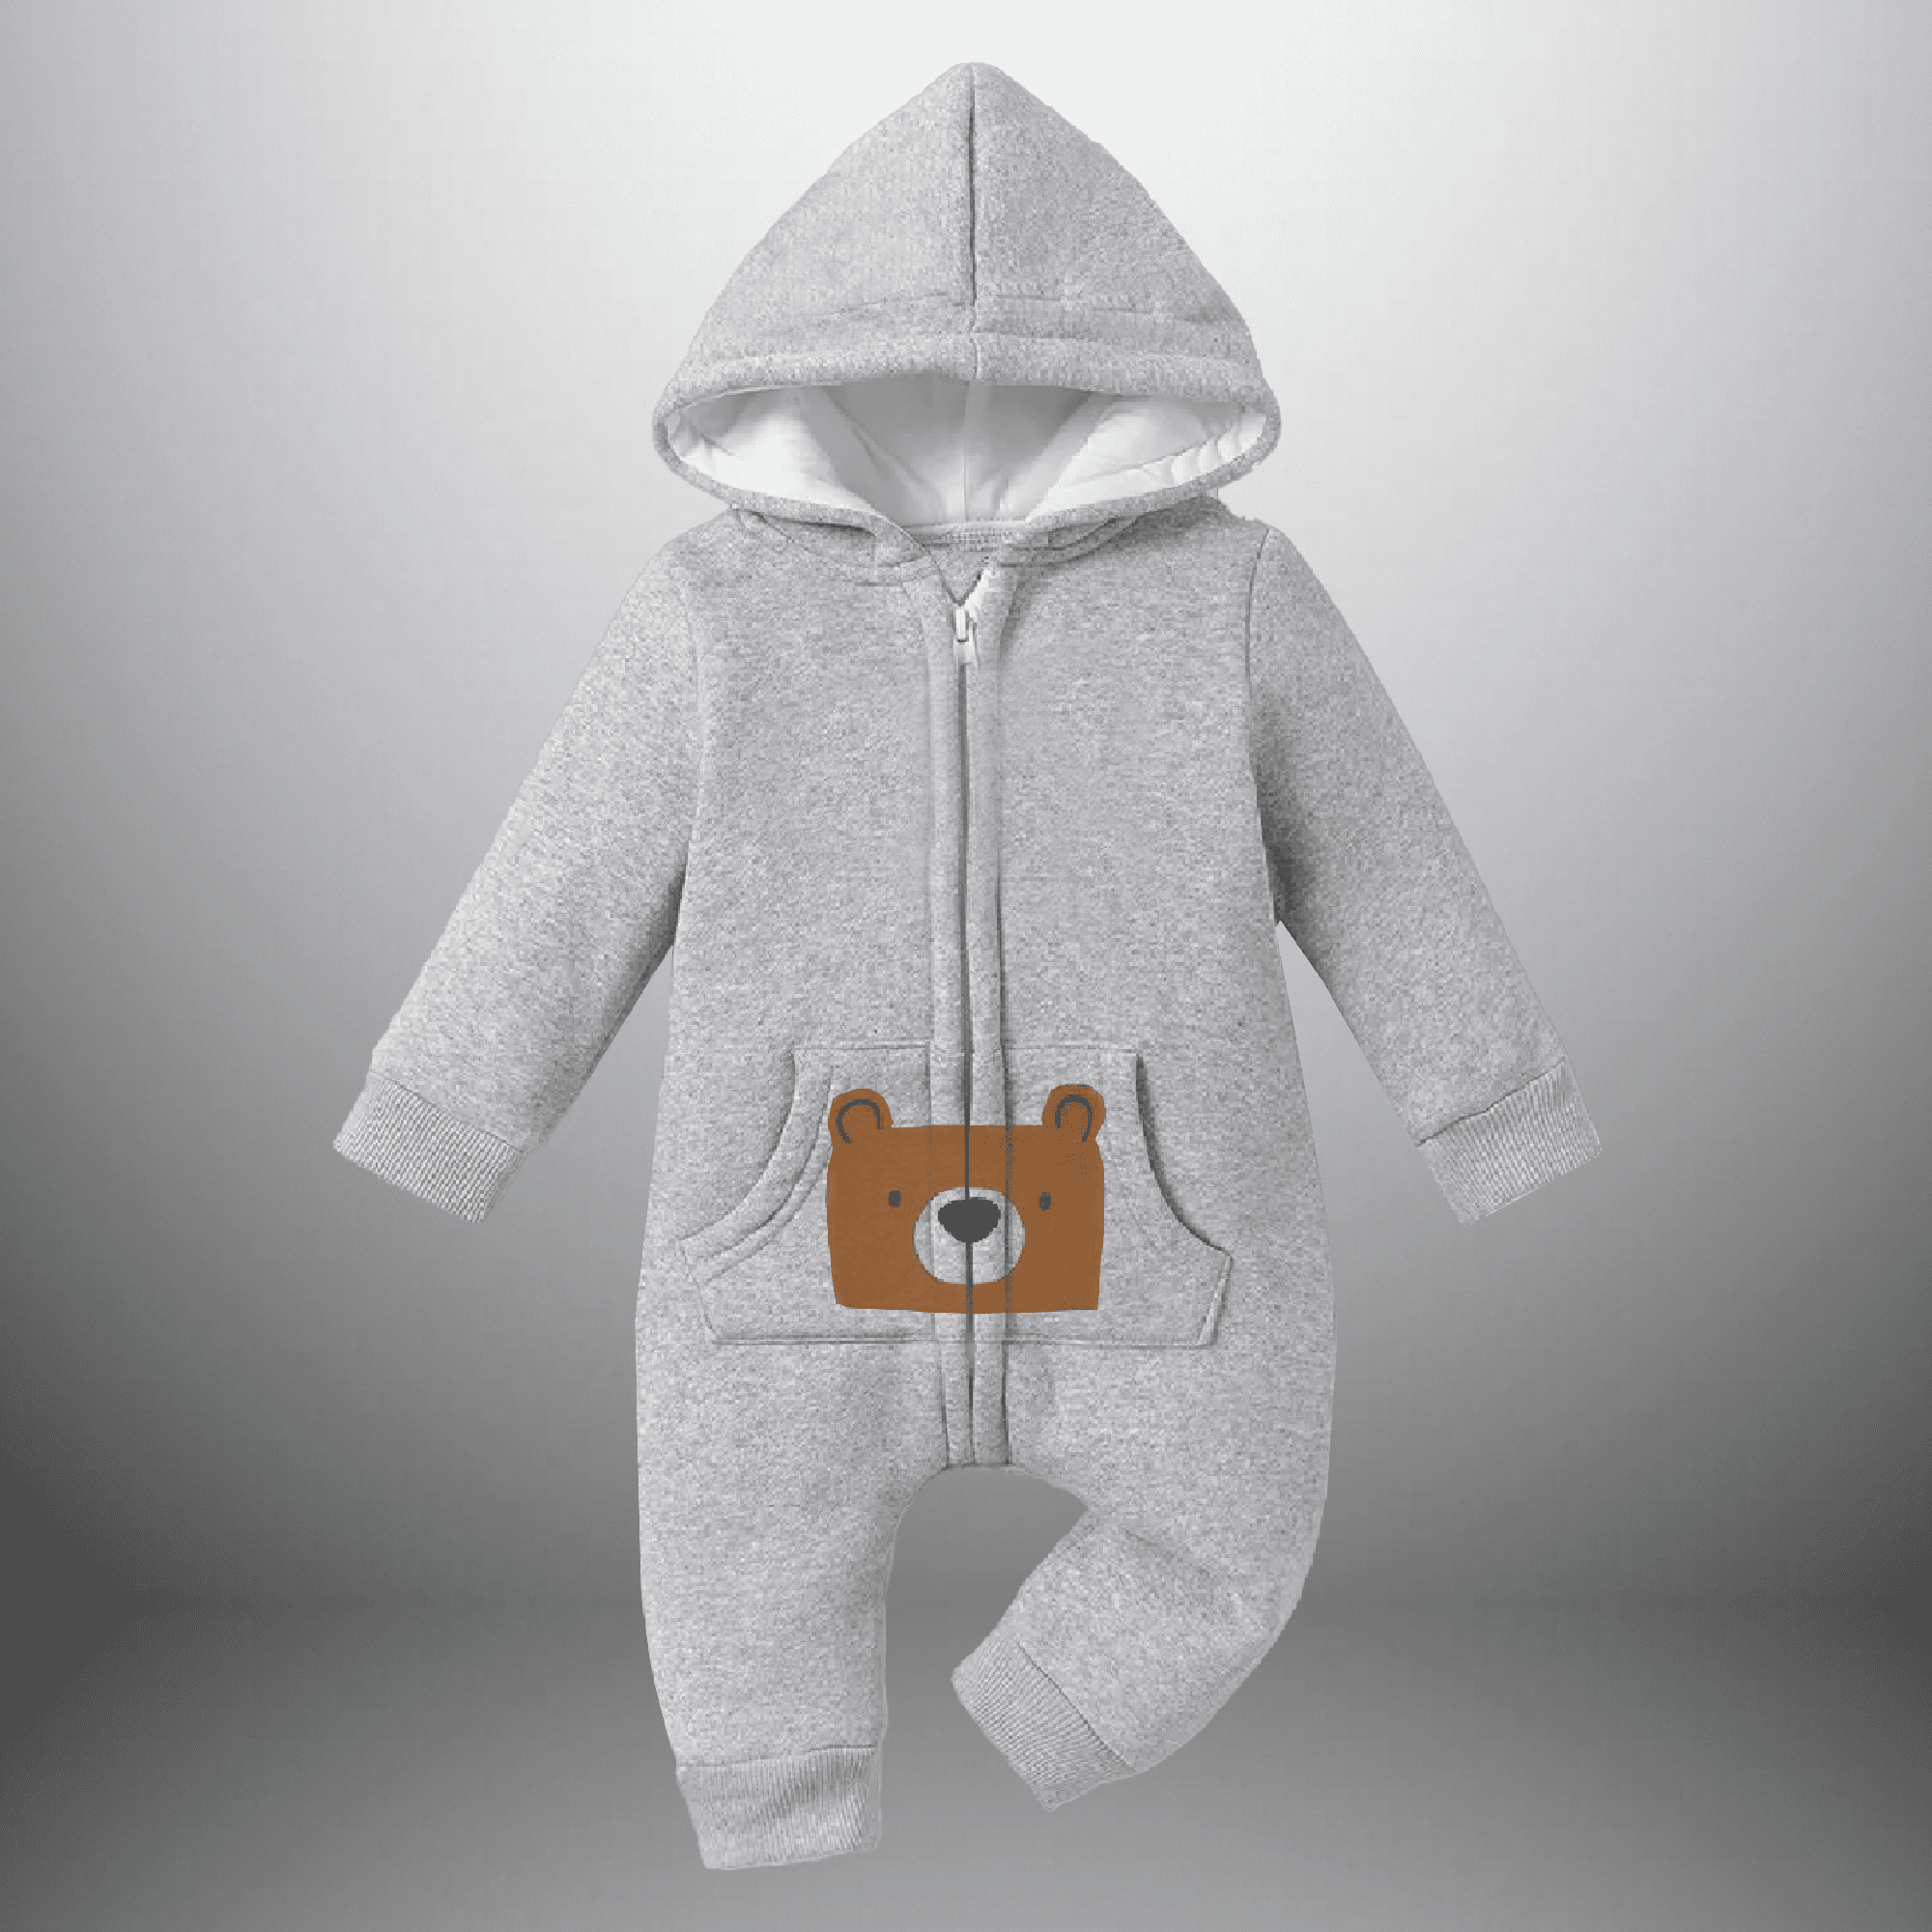 Toddler's Grey hooded Romper with front zipper-RKFCTT107